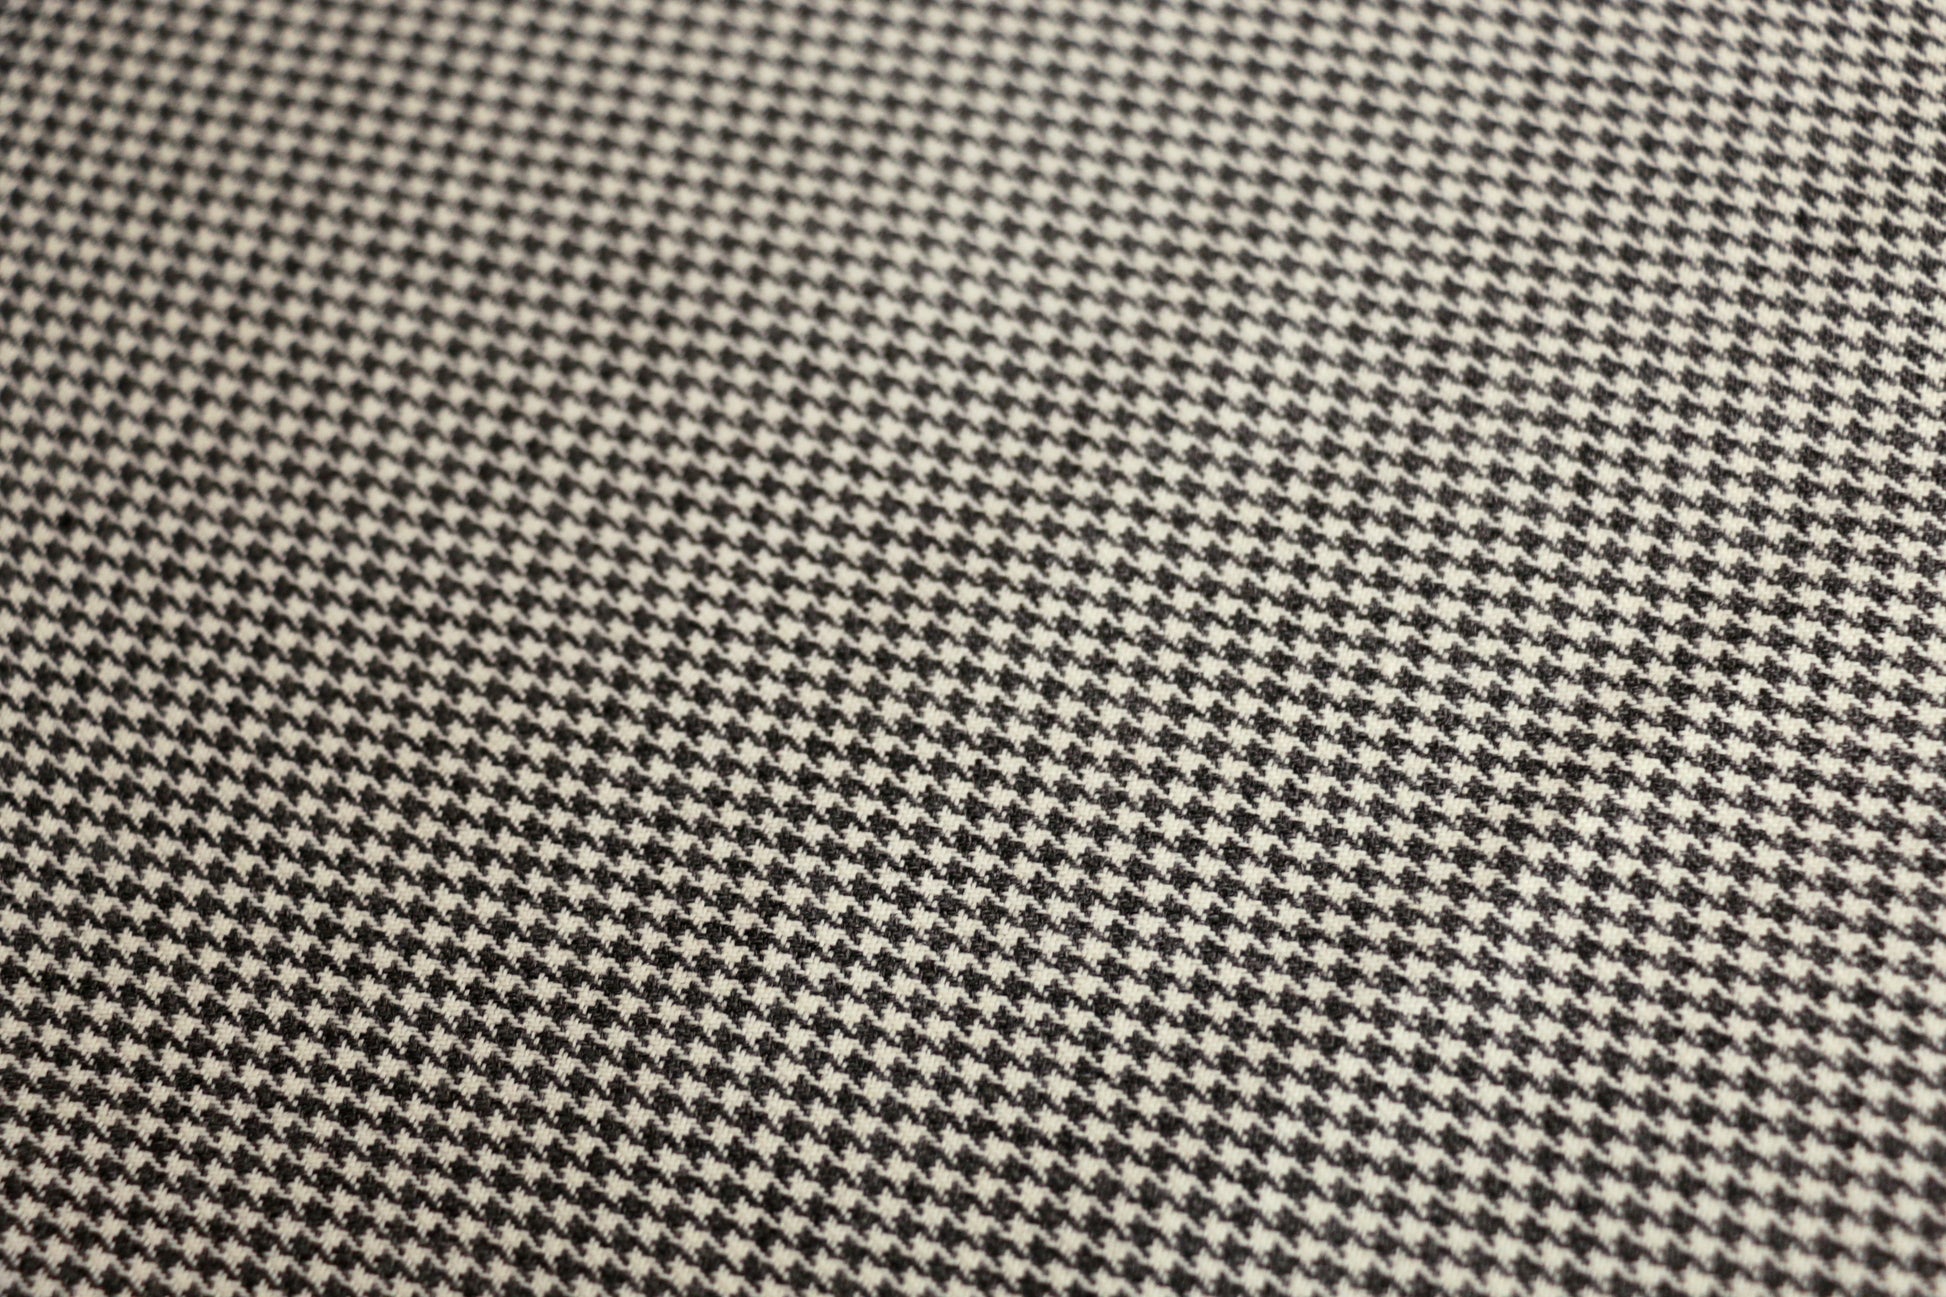 wool-blend-suiting-fabric-grey-and-off-white-houndstooth-design-clothcontrol